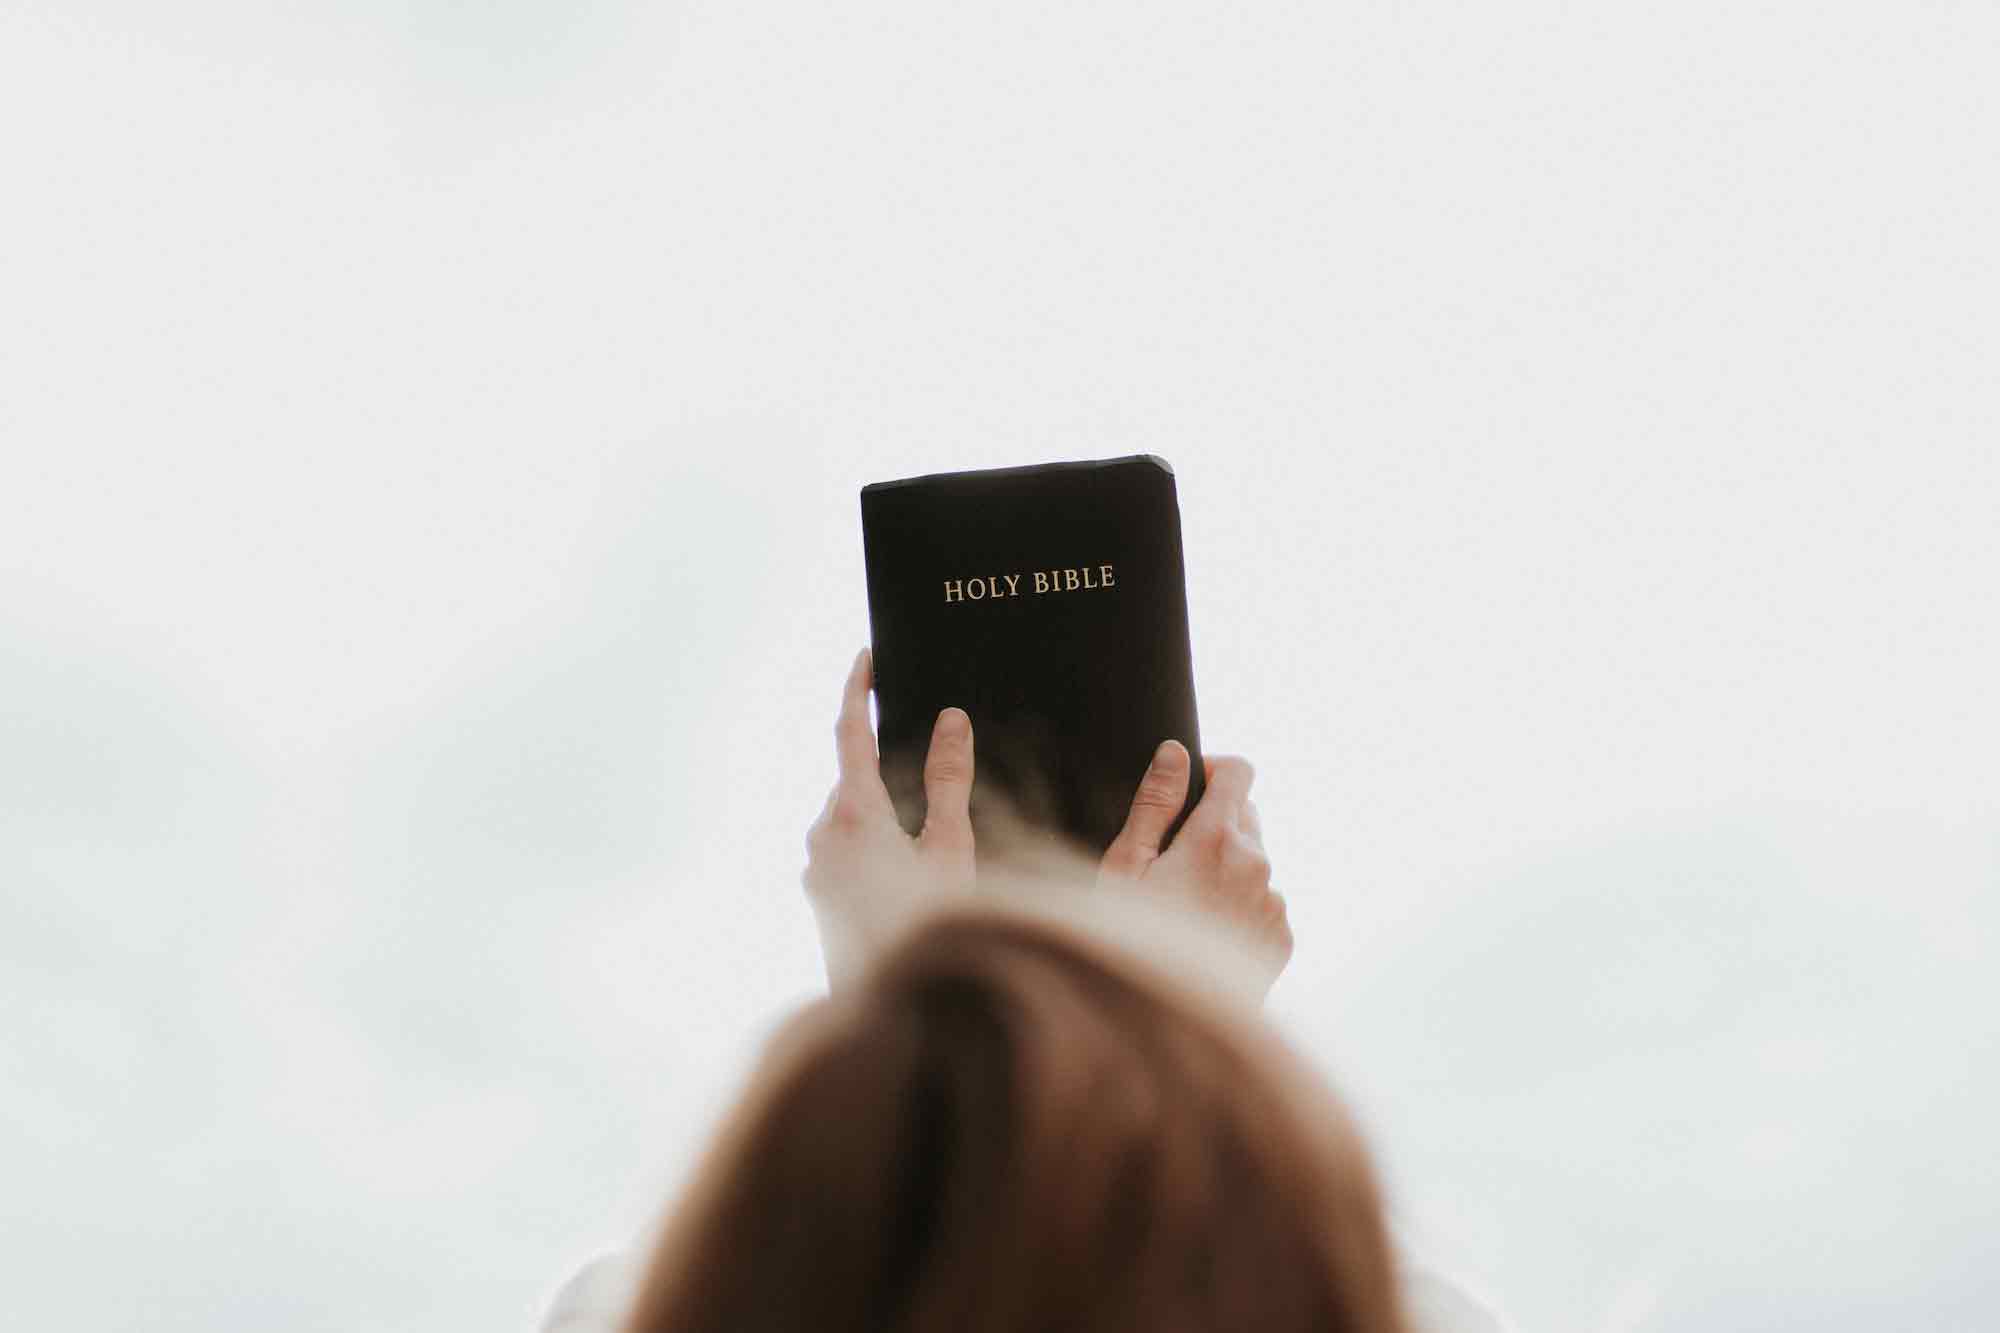 How we can look to the Bible to discover our gifts and grow in faith